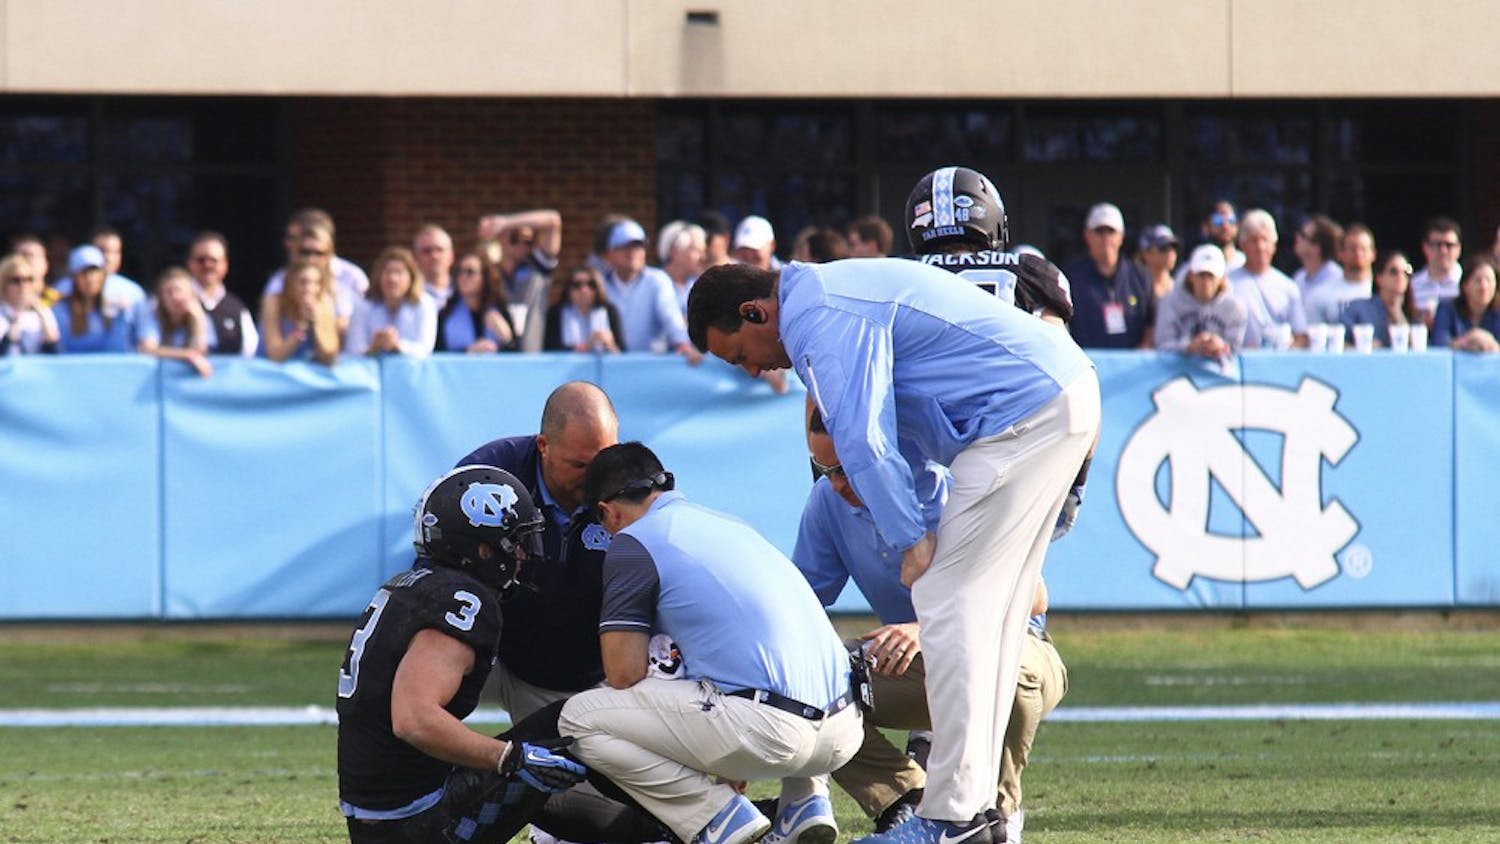 Senior Ryan Switzer (3) is looked at on the field after a minor injury in the game Friday against N.C. State.&nbsp;